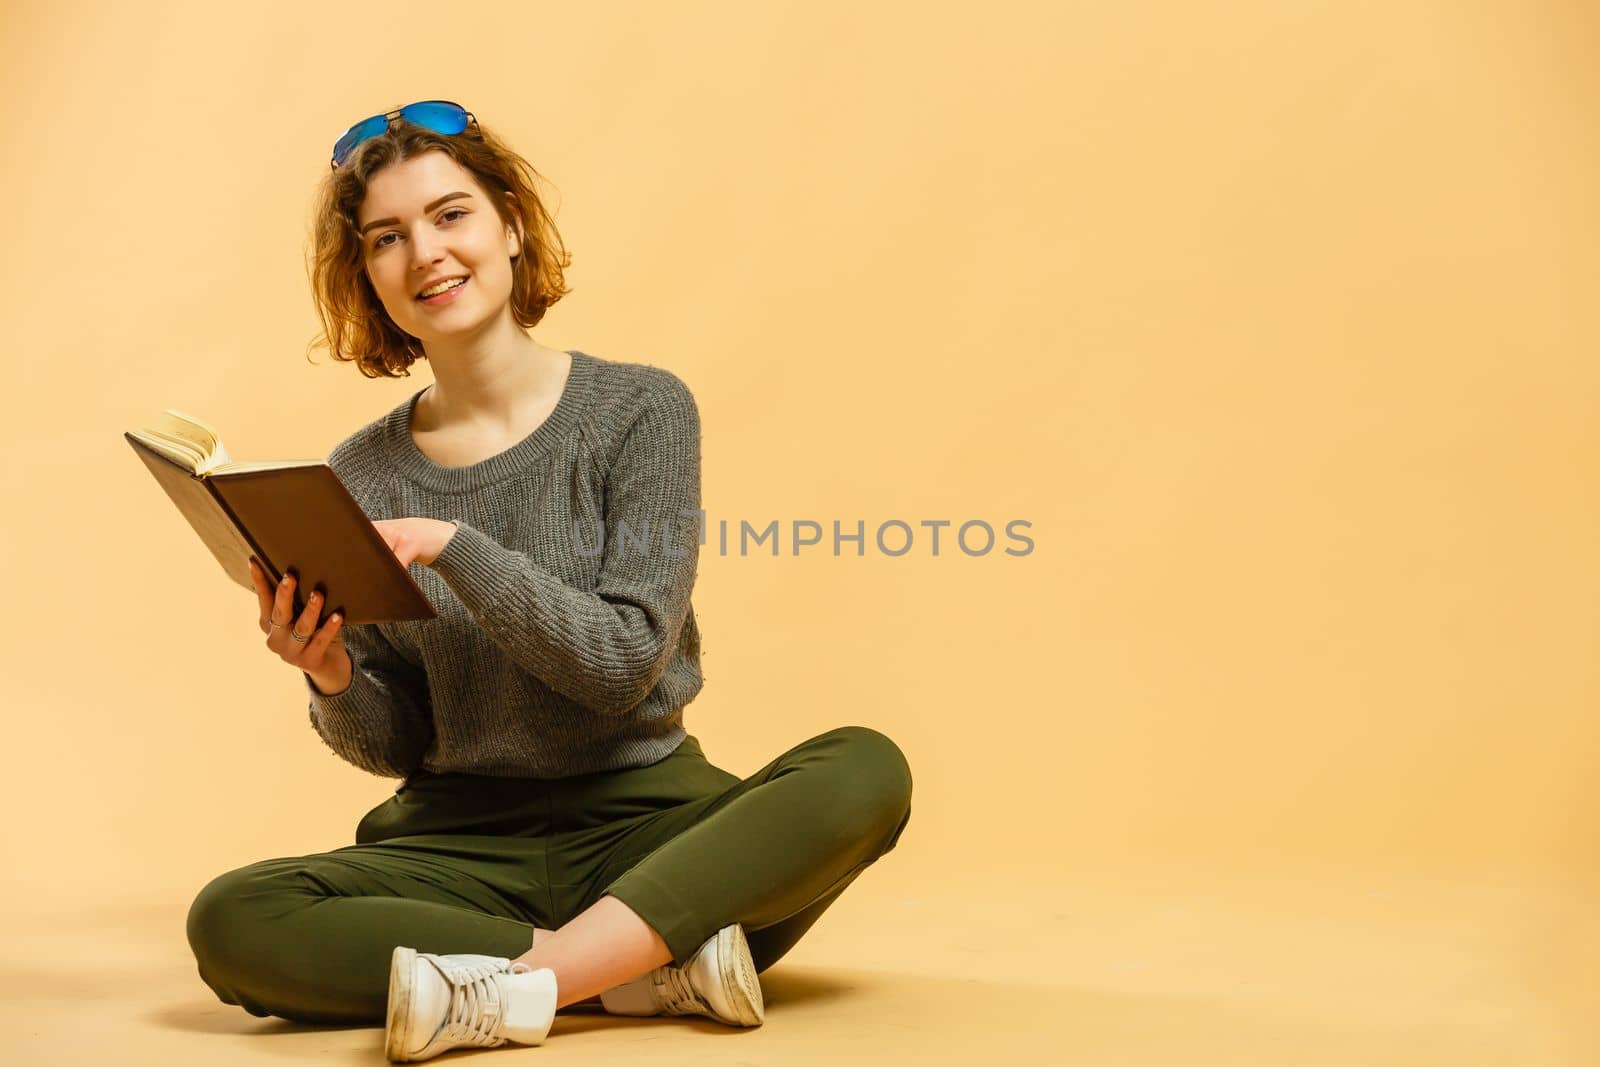 Portrait of cheerful young woman college student holding book and looking at camera on isolated beige background. Pretty redhead lady model wearing casual clothes emotionally showing facial expressions.